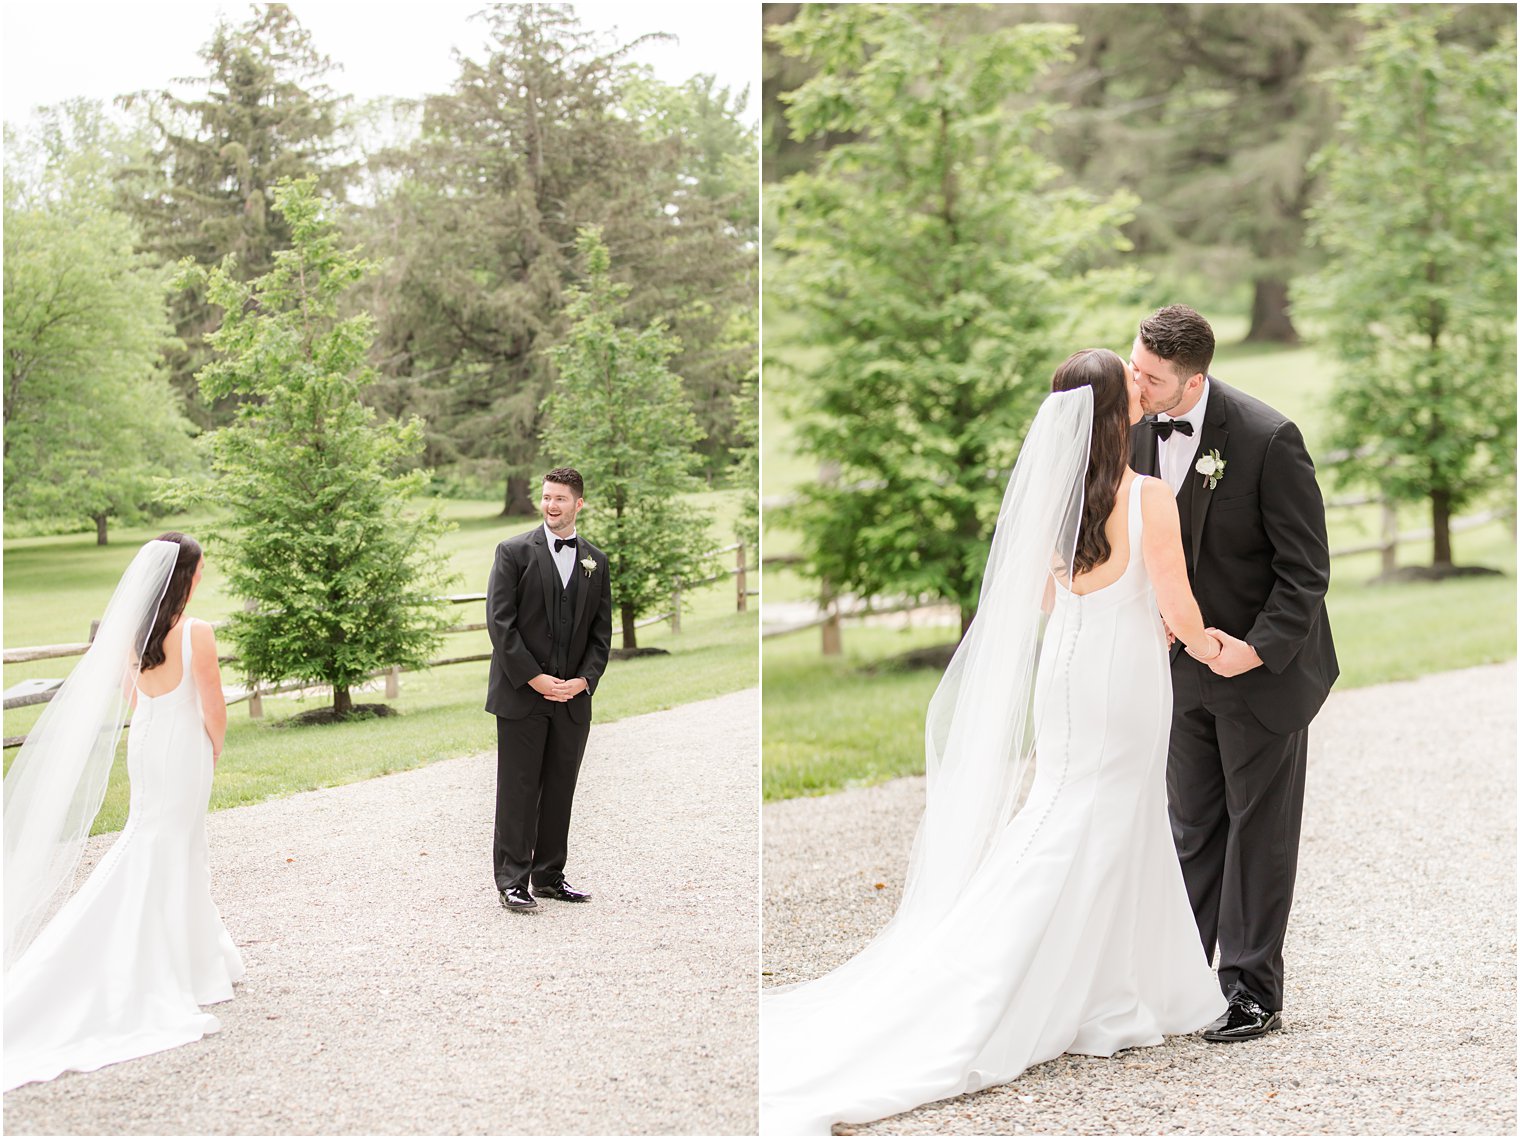 first look done outdoors amidst pine trees at Crossed Keys Estate